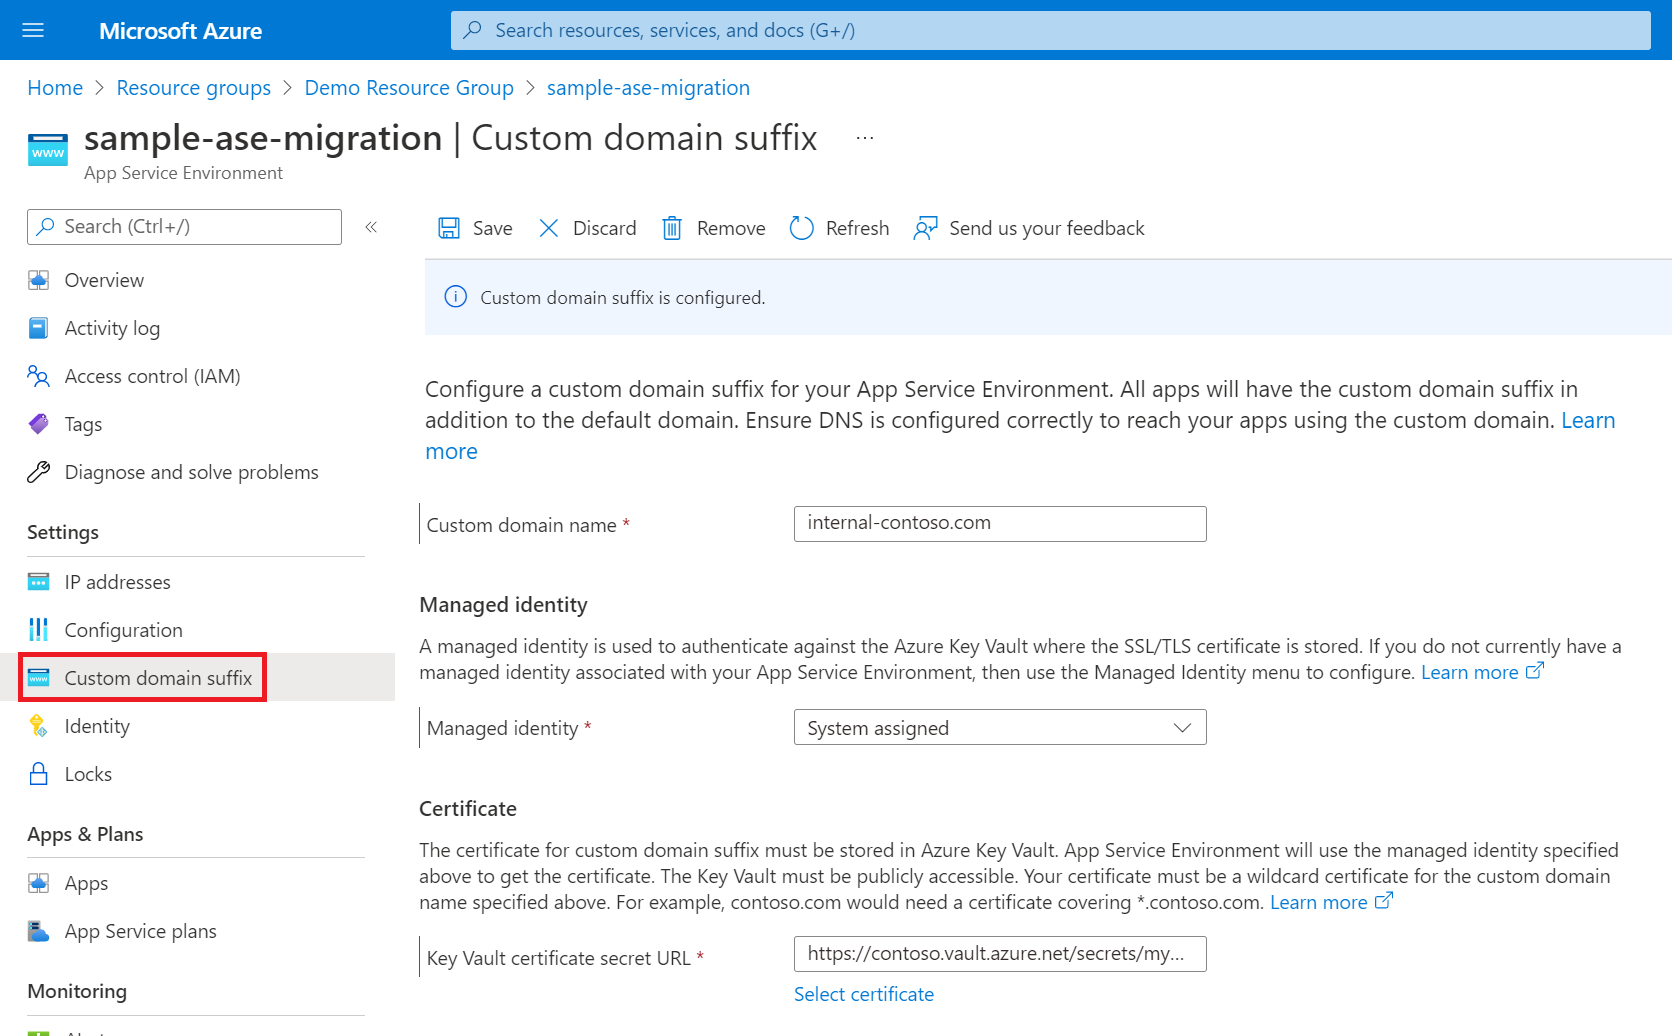 Screenshot that shows the page for custom domain suffix configuration for App Service Environment v3.